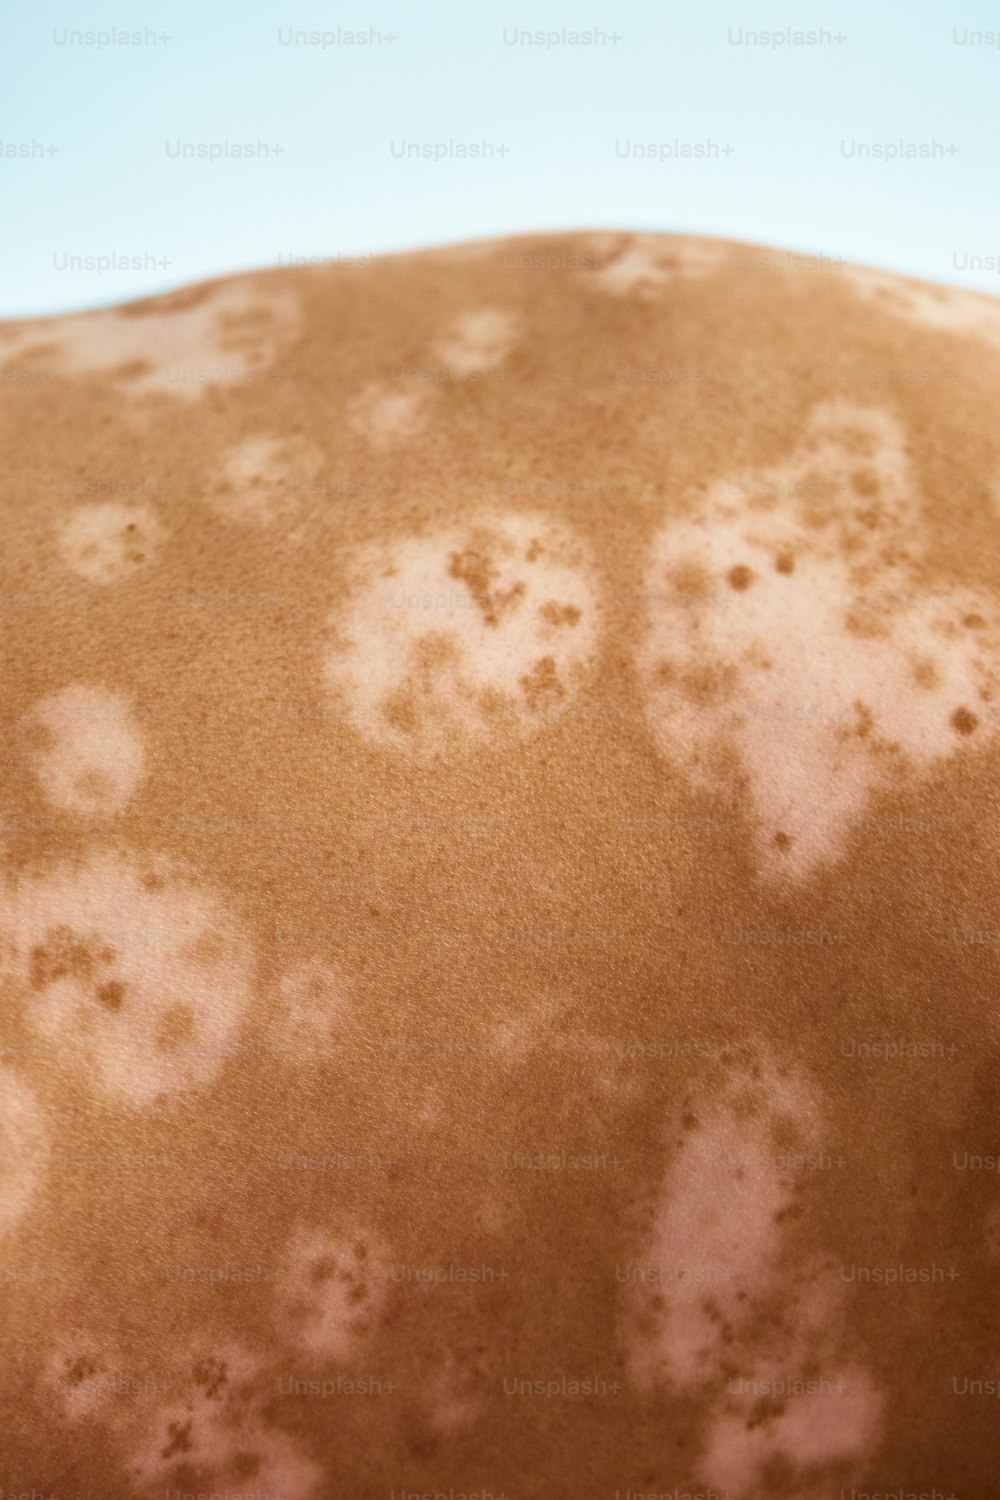 a close up of a person's back with brown spots on it